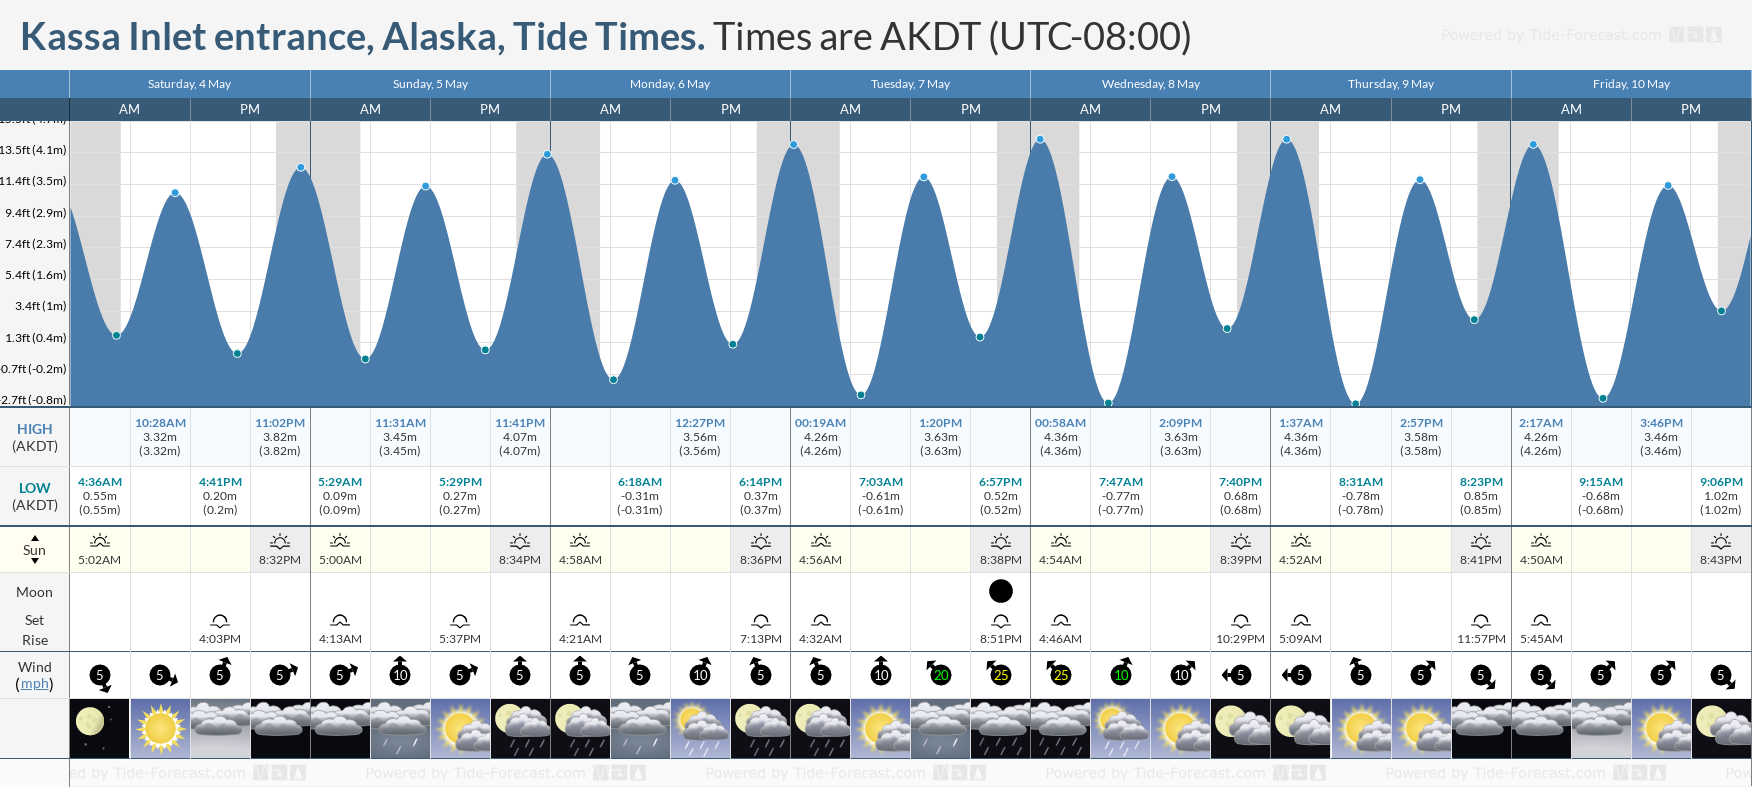 Kassa Inlet entrance, Alaska Tide Chart including high and low tide times for the next 7 days